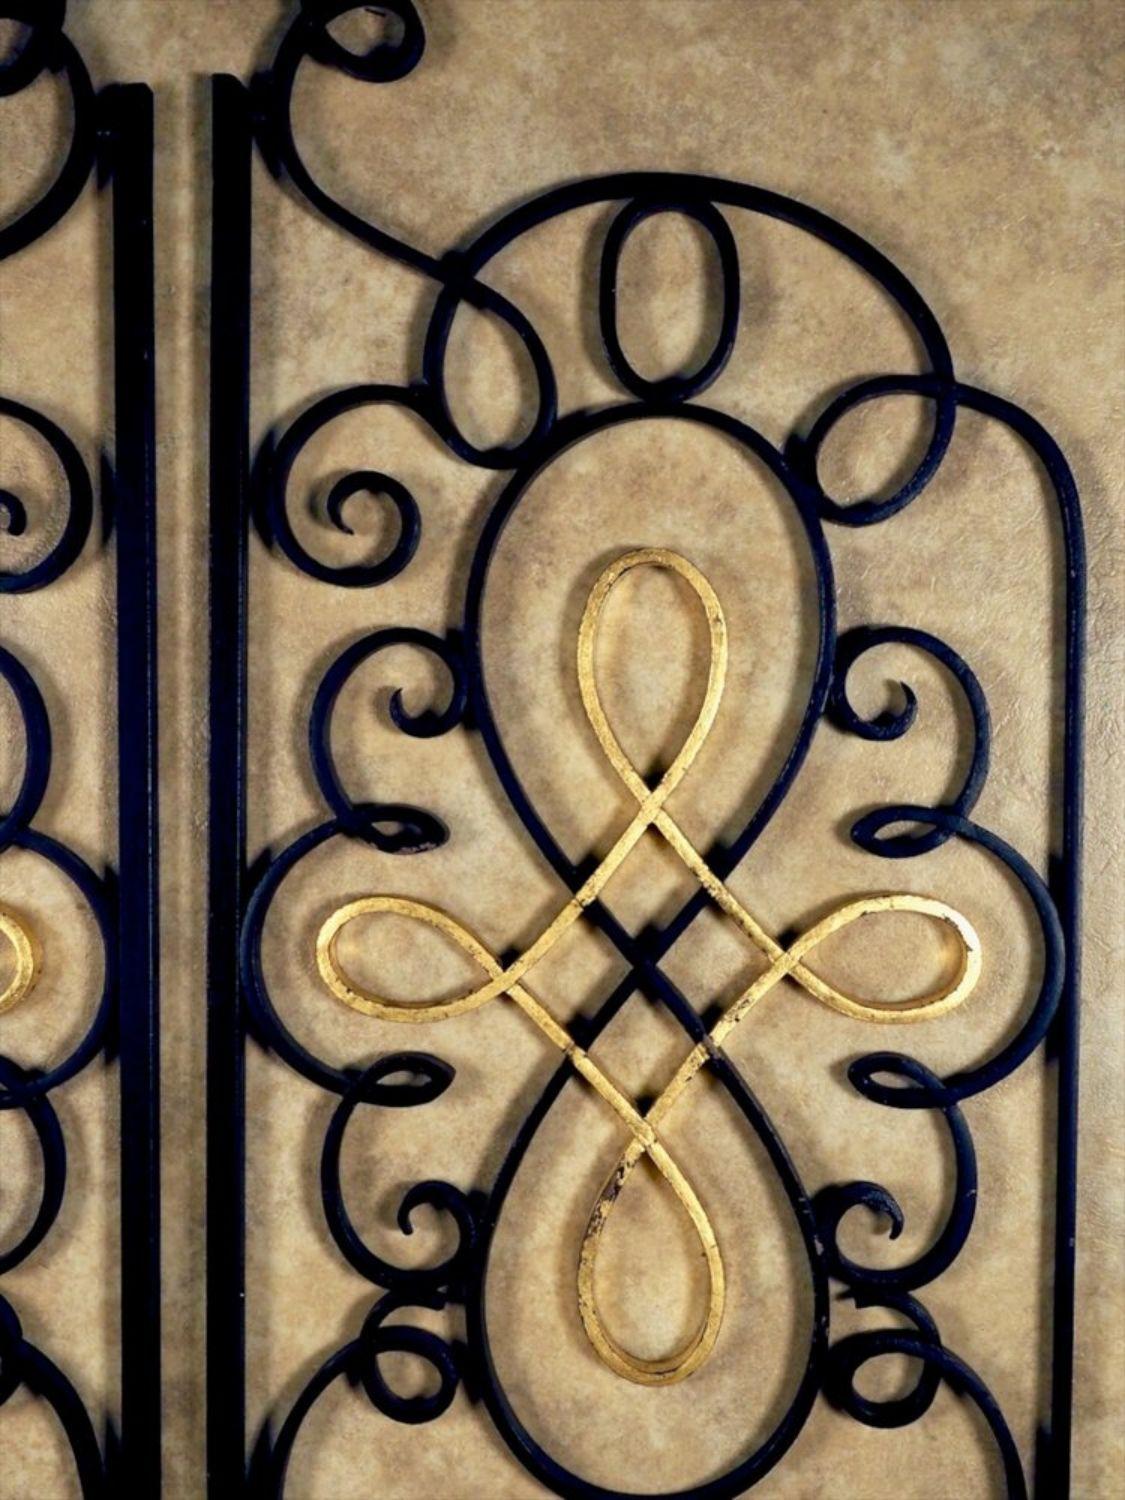 French 1940s pair of forged iron and gilt grilles/gates by Raymond Subes. Measures: 41” wide overall x 65” high at peak.